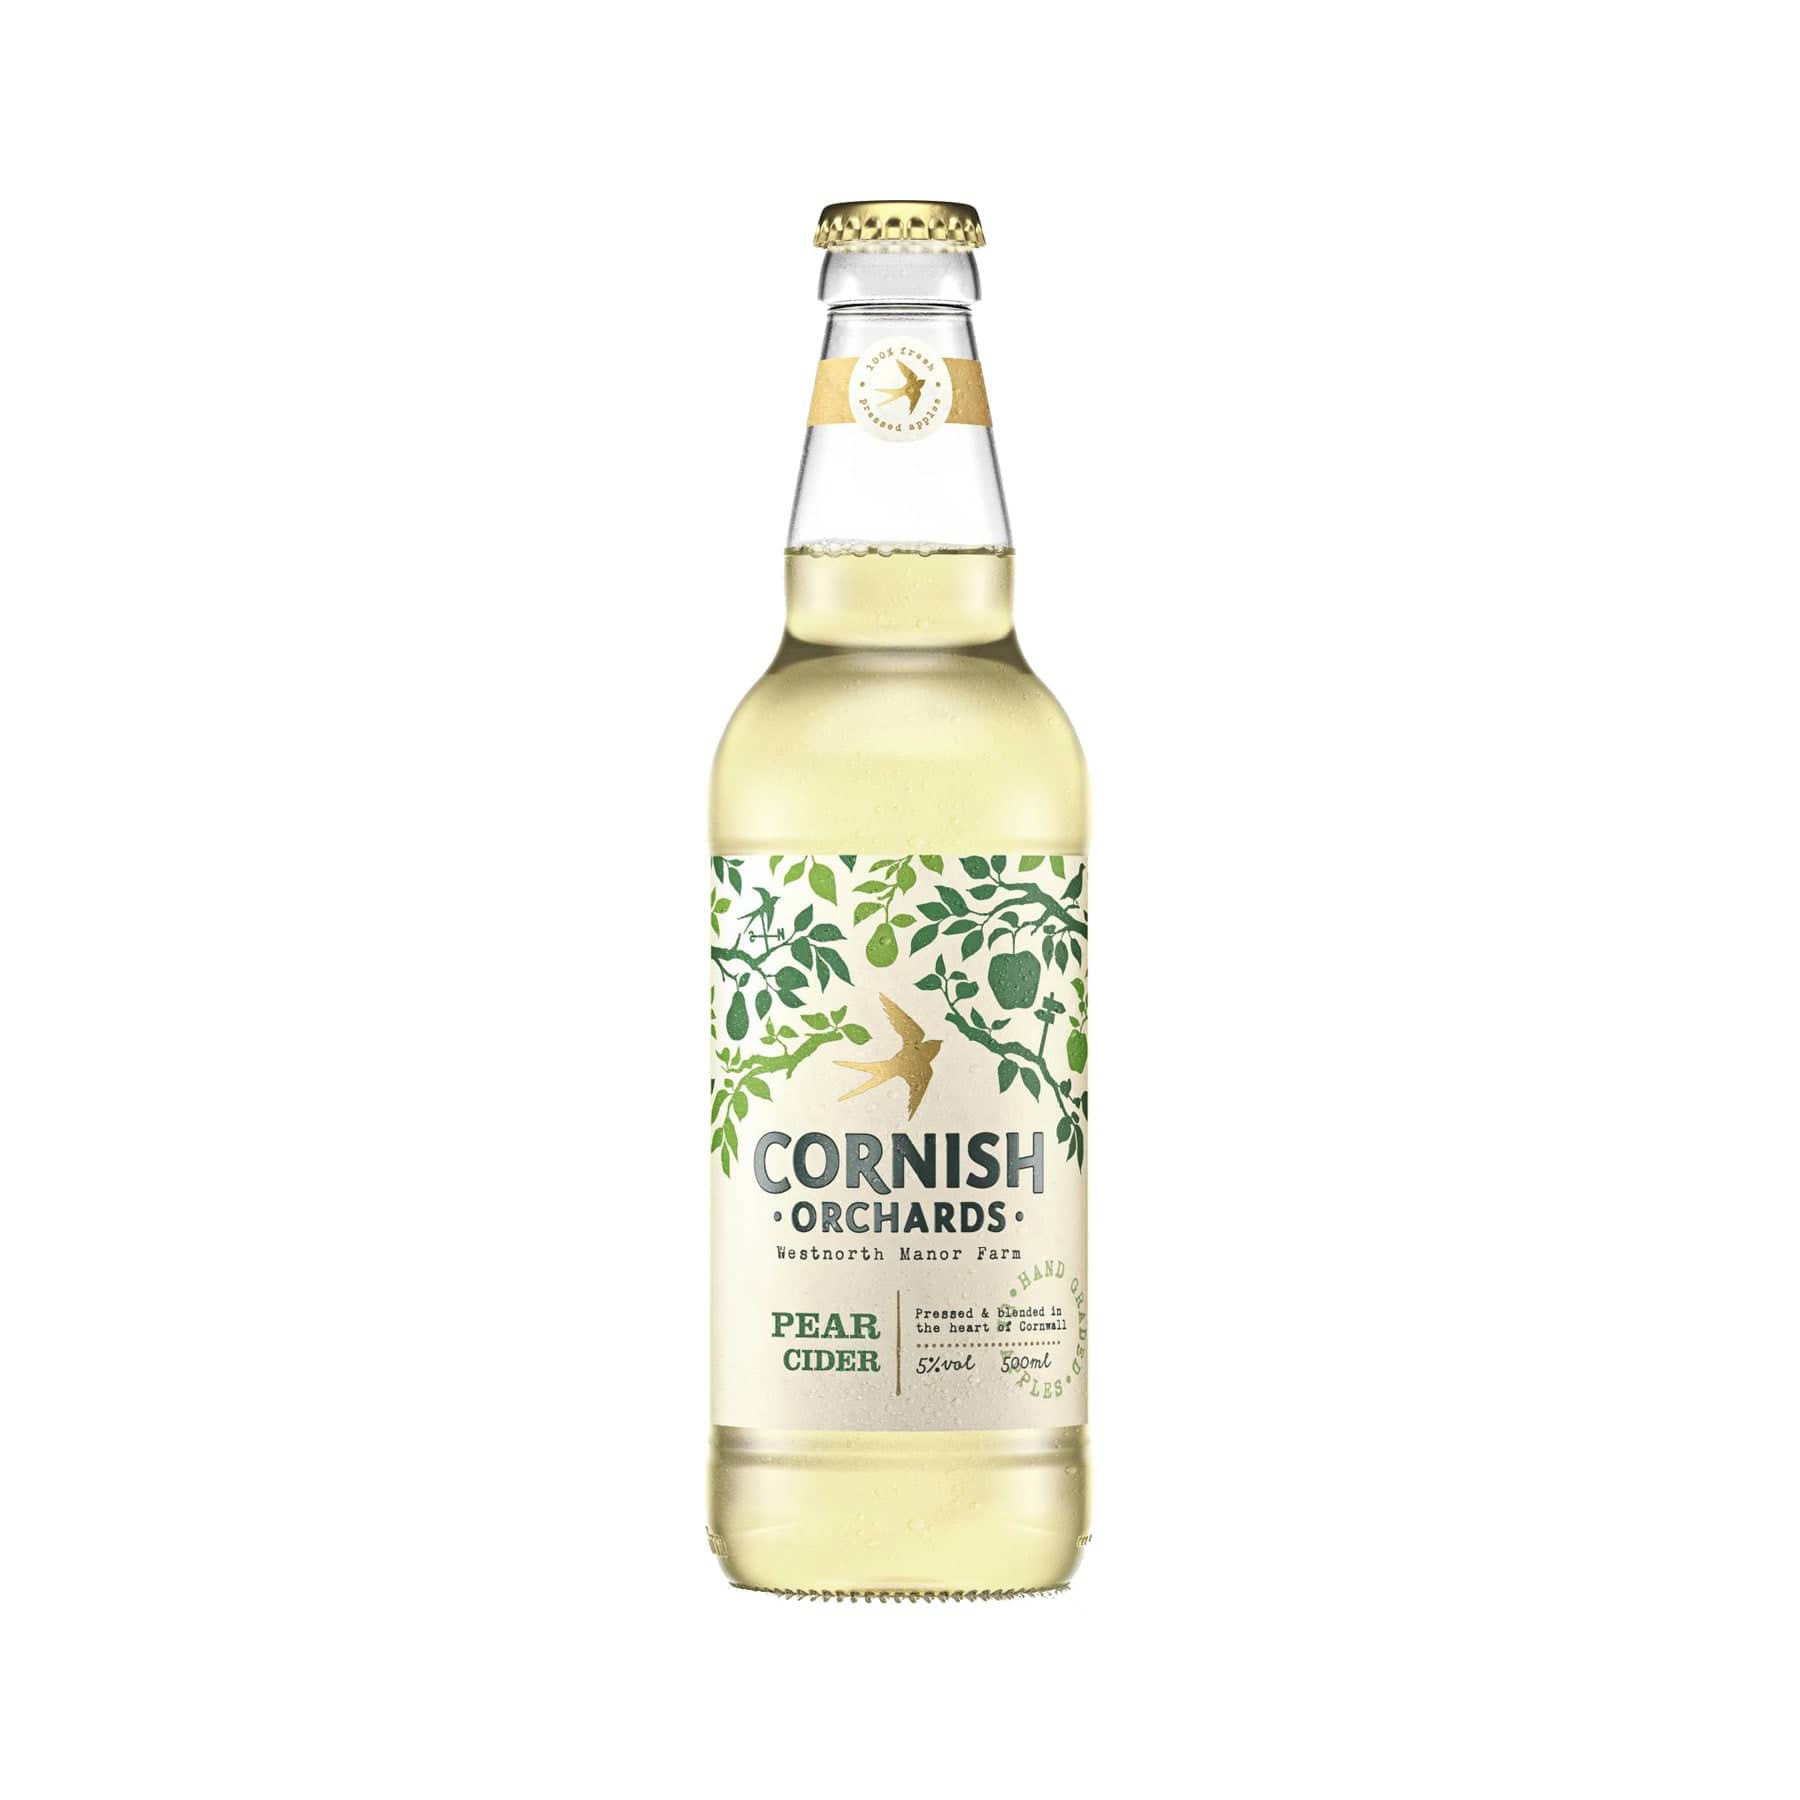 Cornish Orchards Pear Cider bottle with green label, tree and deer illustration, Westnorth Manor Farm info, 5% alcohol volume, refreshing beverage on white background